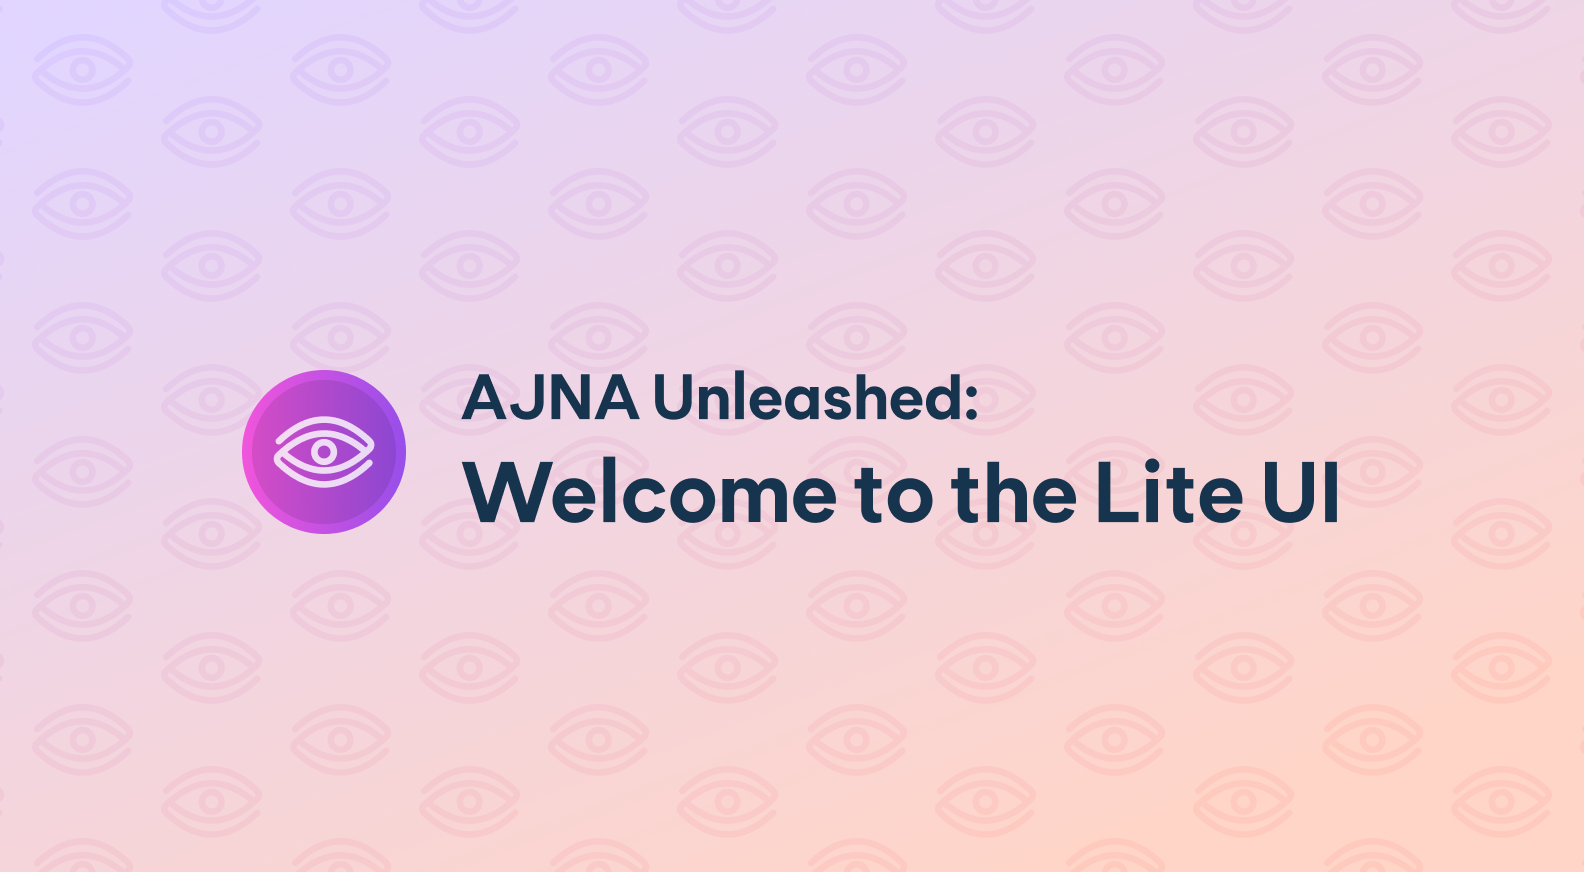 AJNA Unleashed: Welcome to the Lite UI